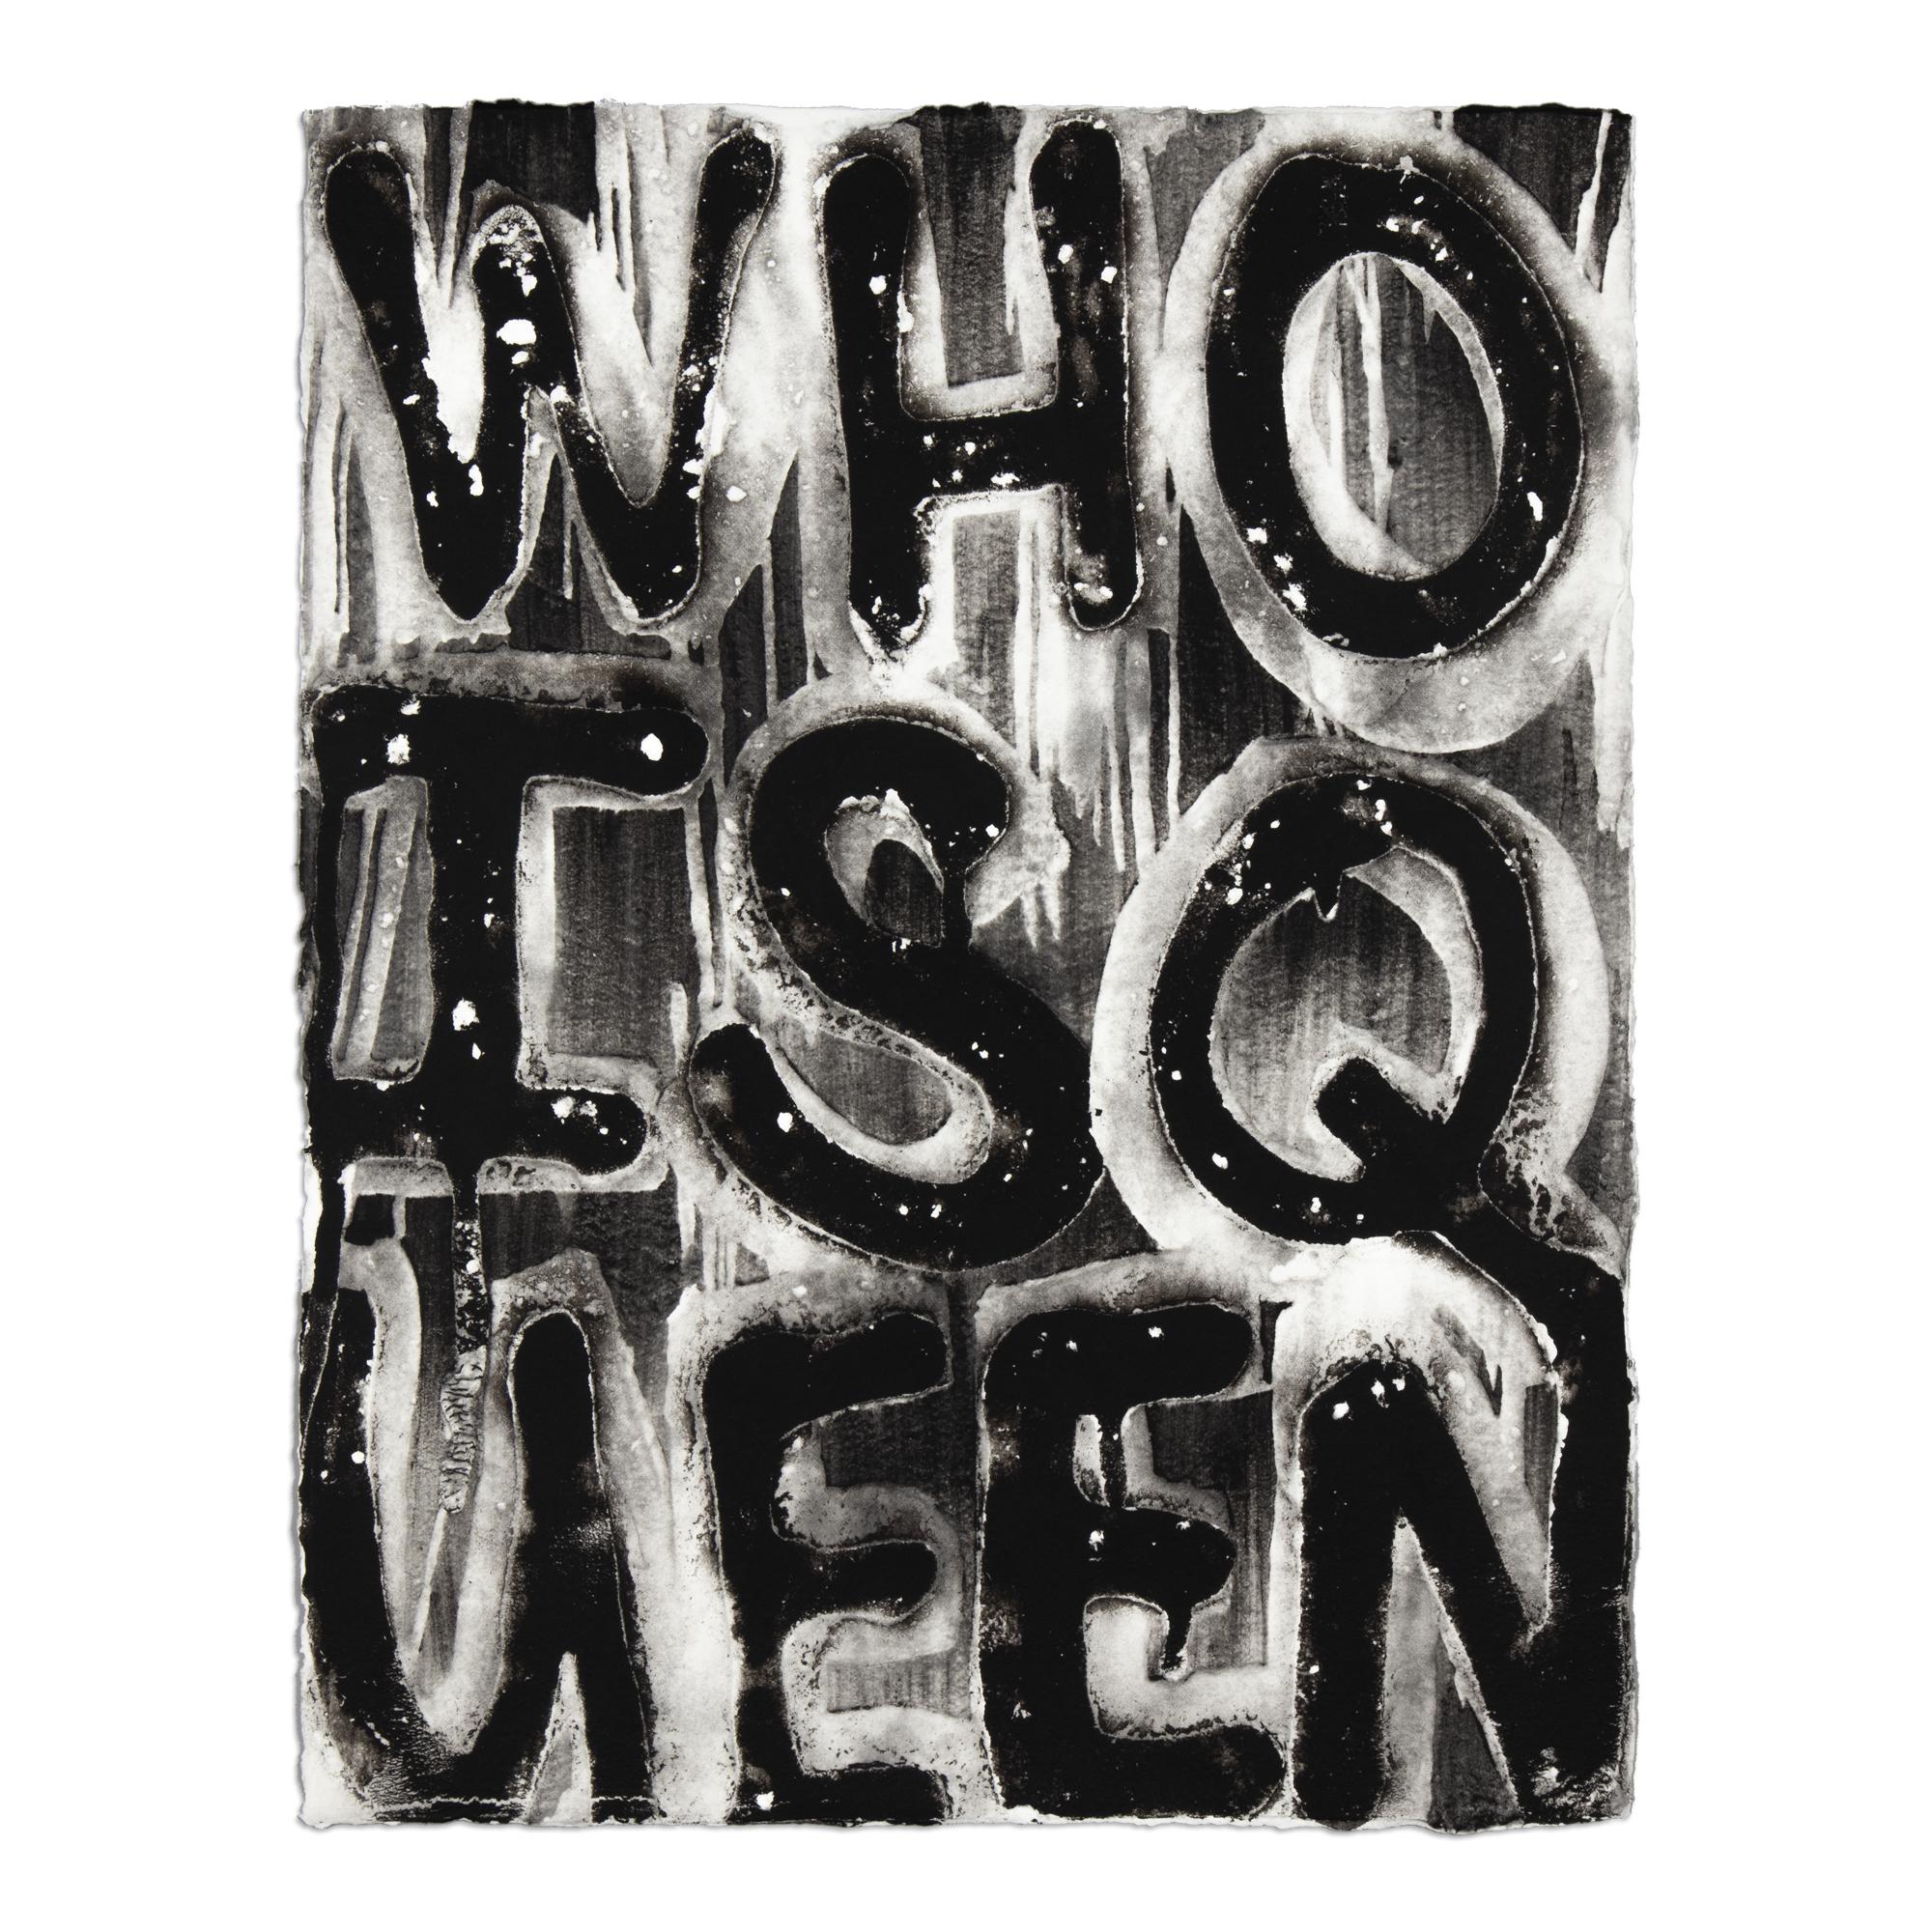 Adam Pendleton, Who Is Queen? - Signed Print, Contemporary Art